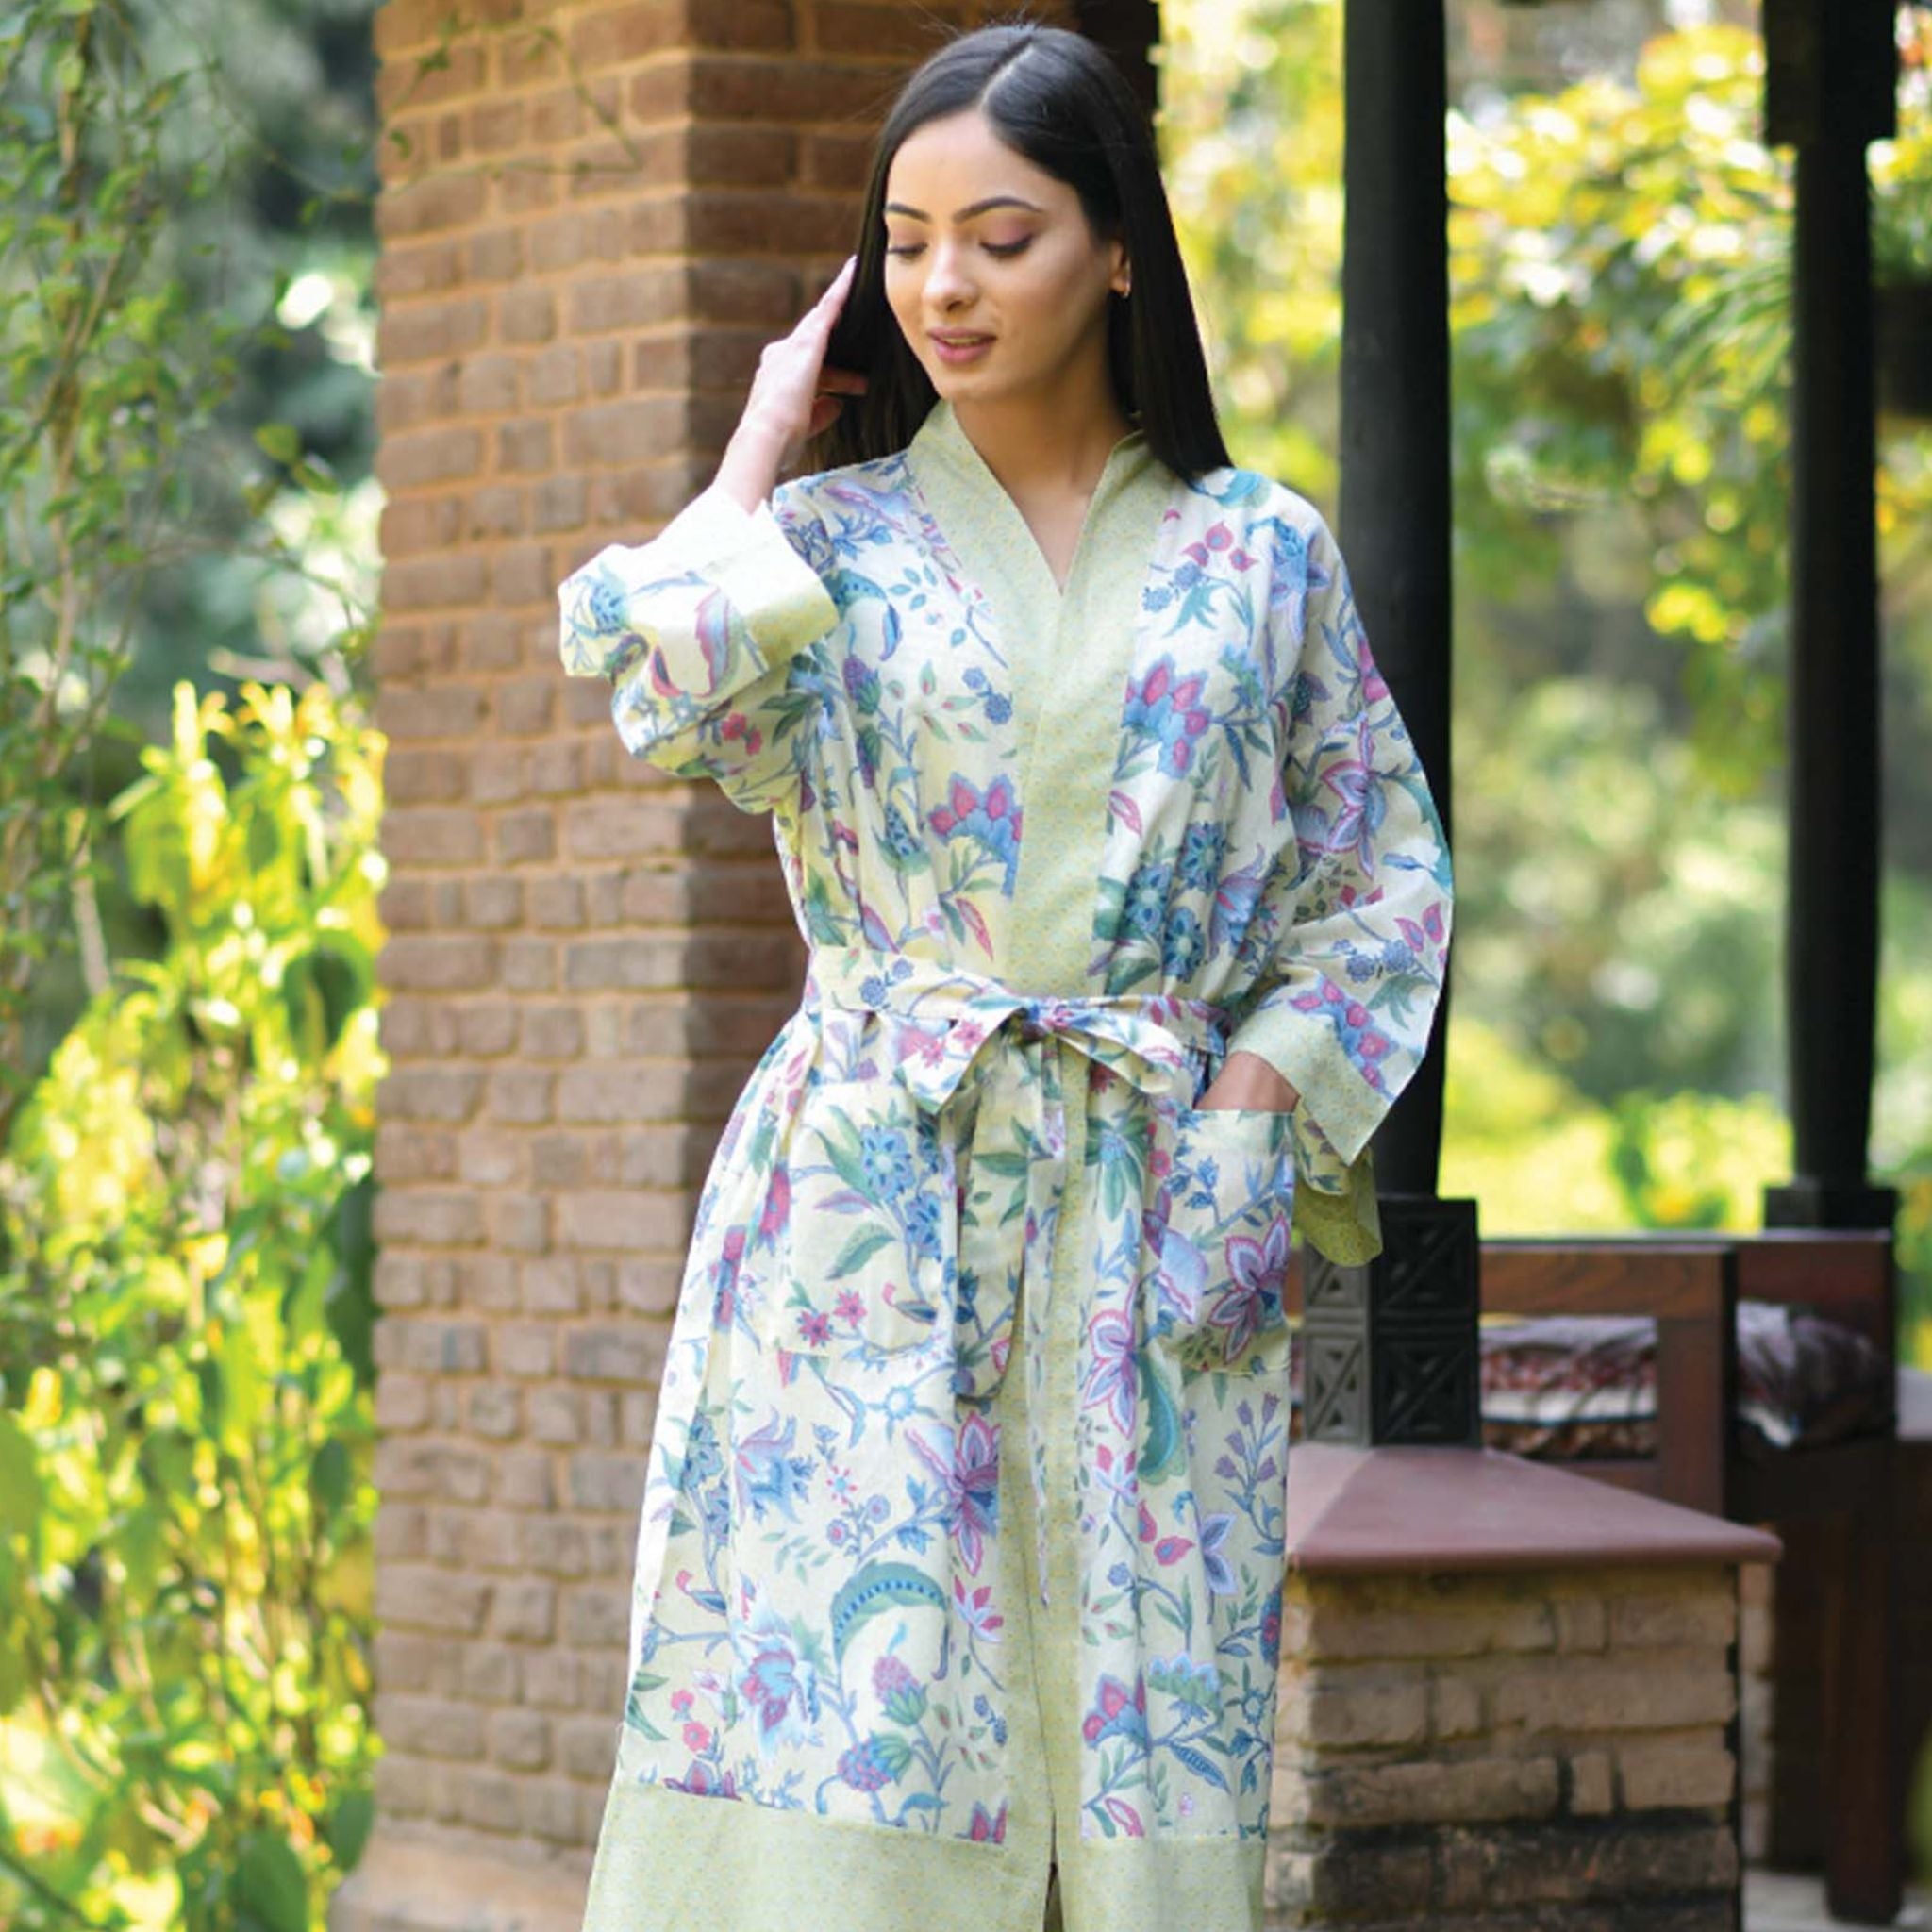 One Size, Soft Cotton Kimono for Loungewear or Travel, handprinted in India. Kerala Butter. Light background with pale yellow green border and purple blue floral motifs.